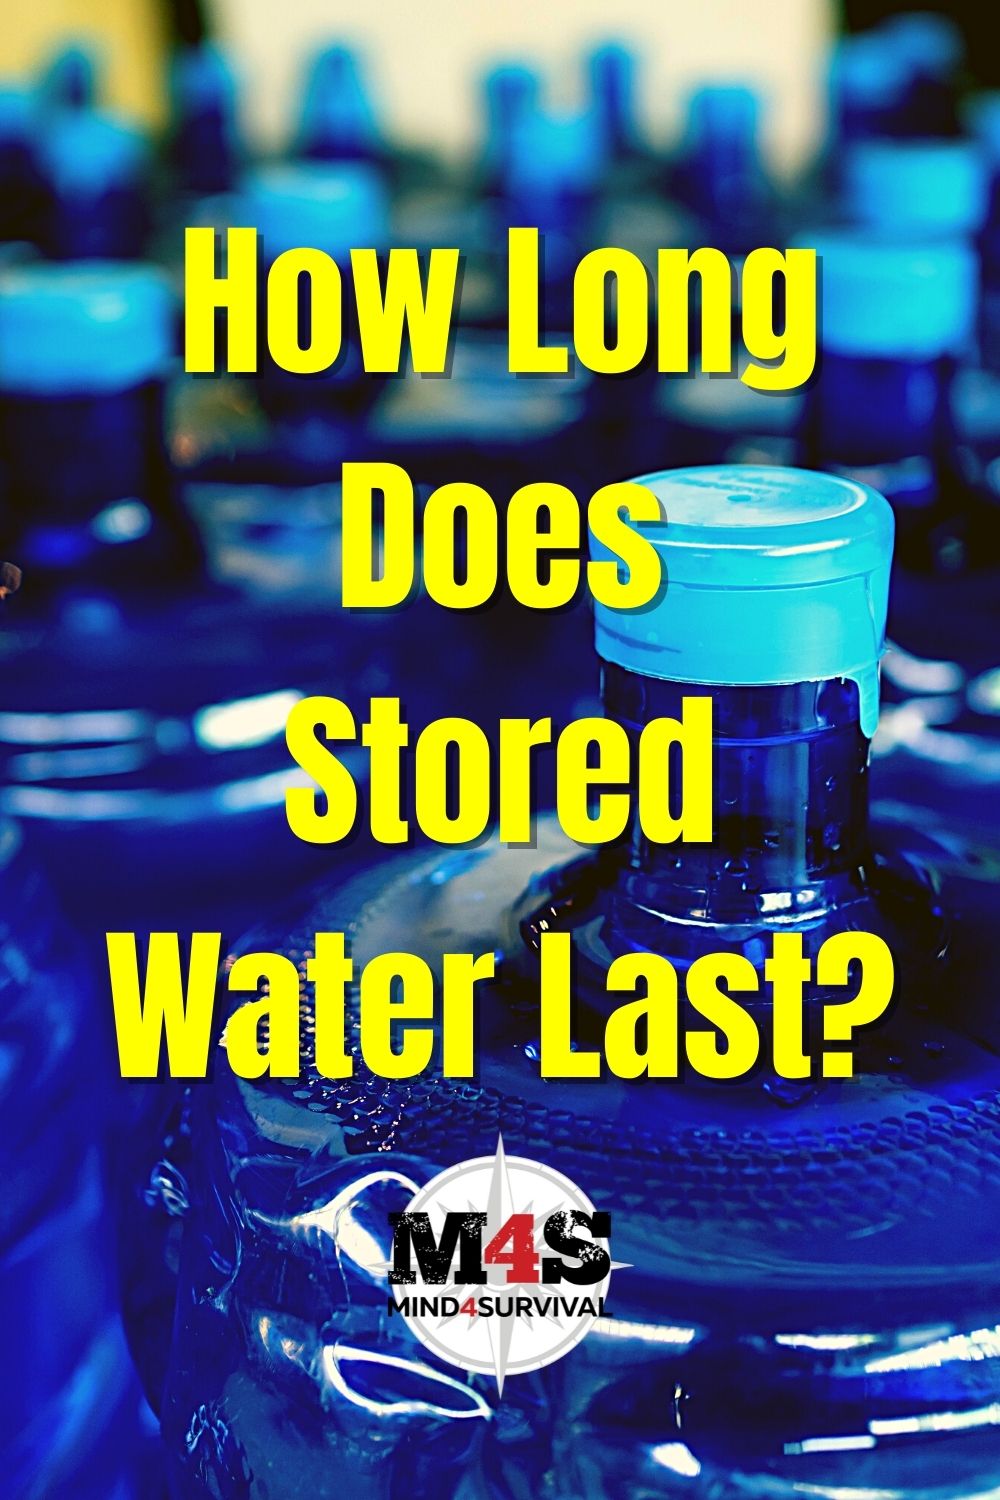 How Long Does Stored Water Last? It Depends.